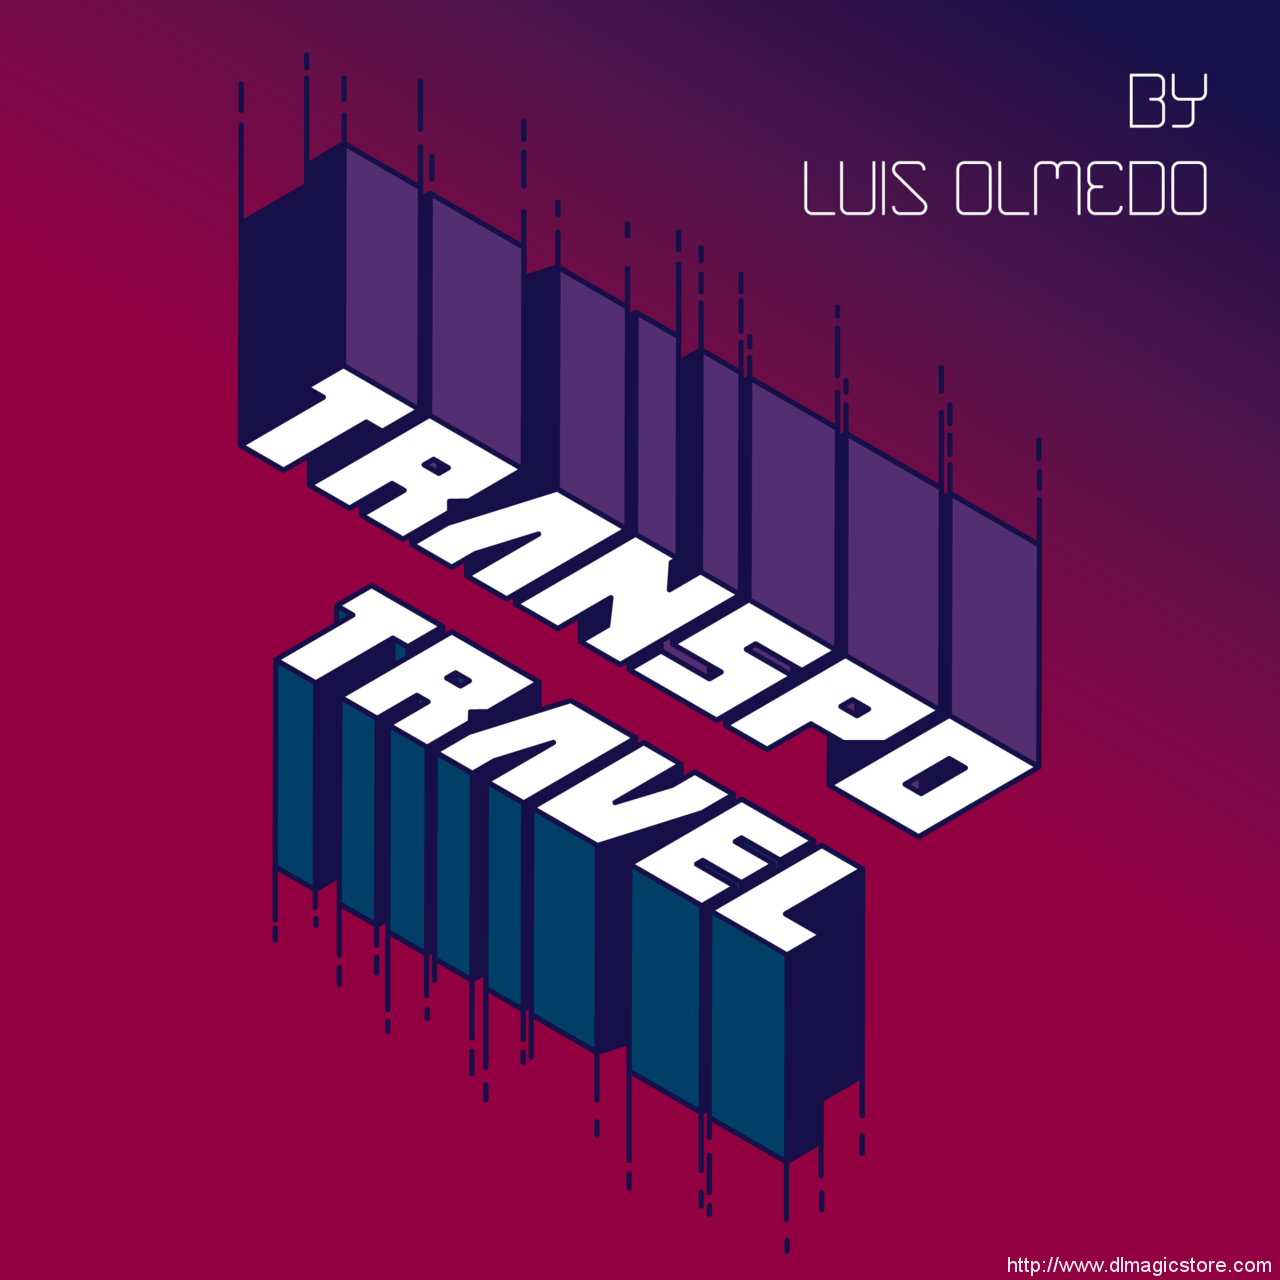 Transpo Travel by Luis Olmedo (Gimmick Not Included)